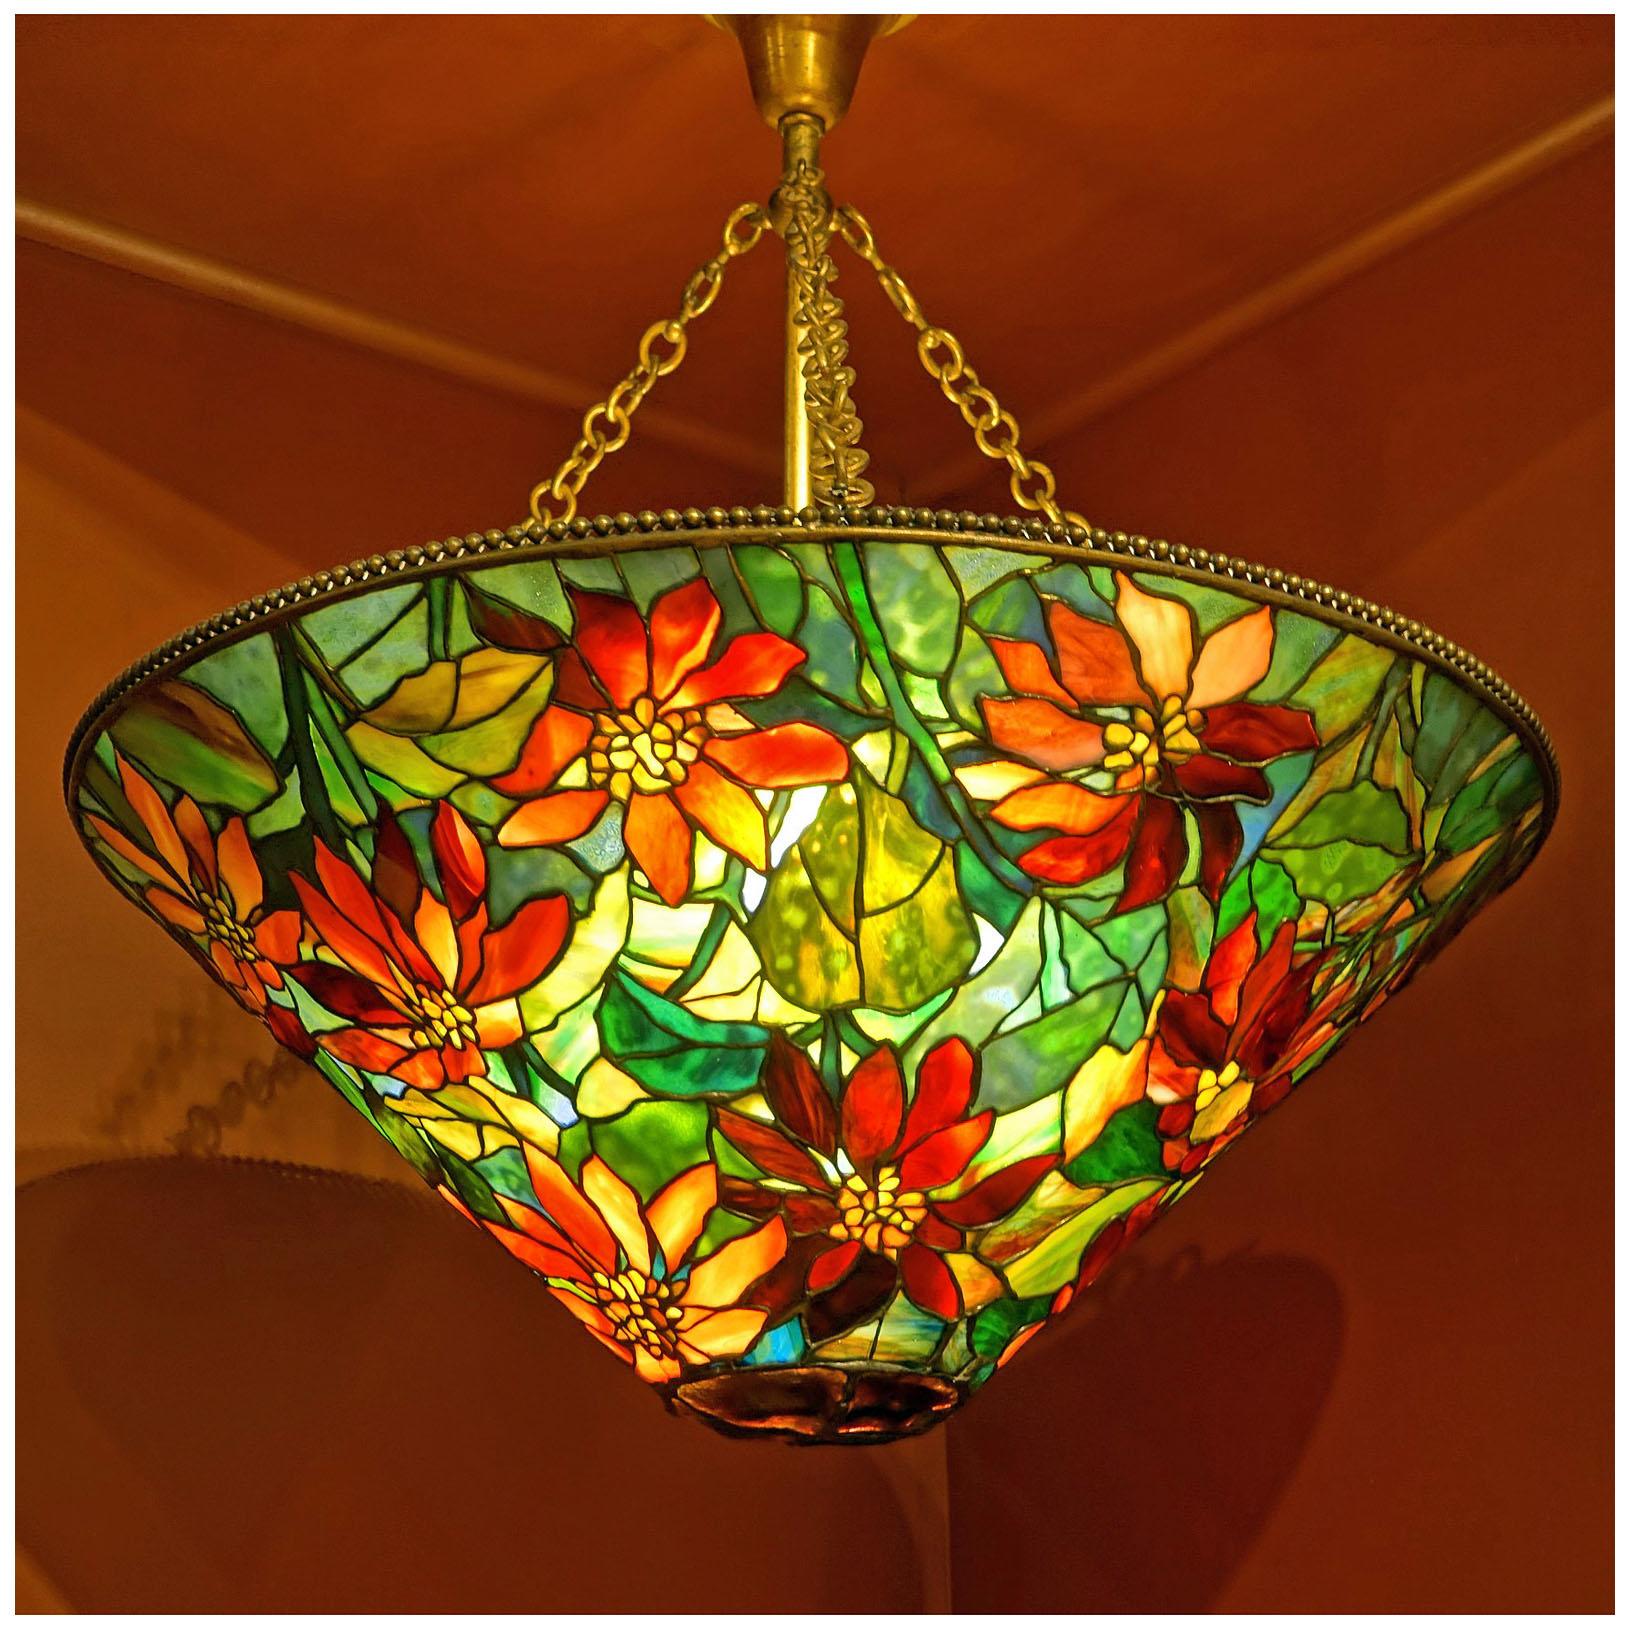 Louis Tiffany. Lampshade. 1914. Currier Museum of Art Manchester